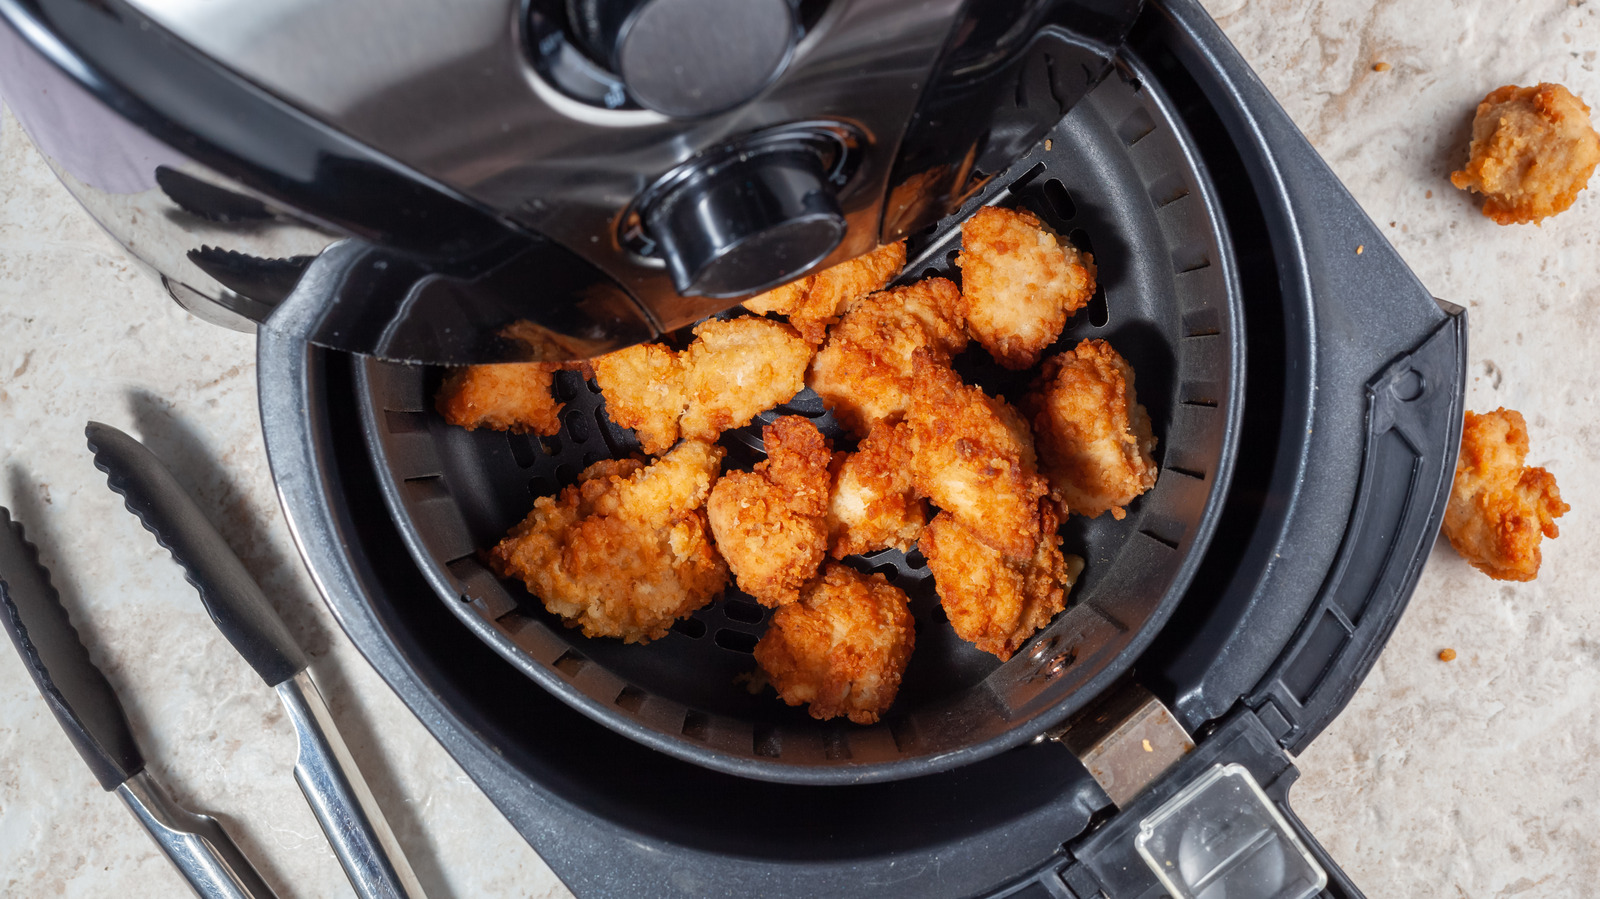 https://www.mashed.com/img/gallery/the-sur-la-table-air-fryer-costco-shoppers-adore/l-intro-1645105177.jpg